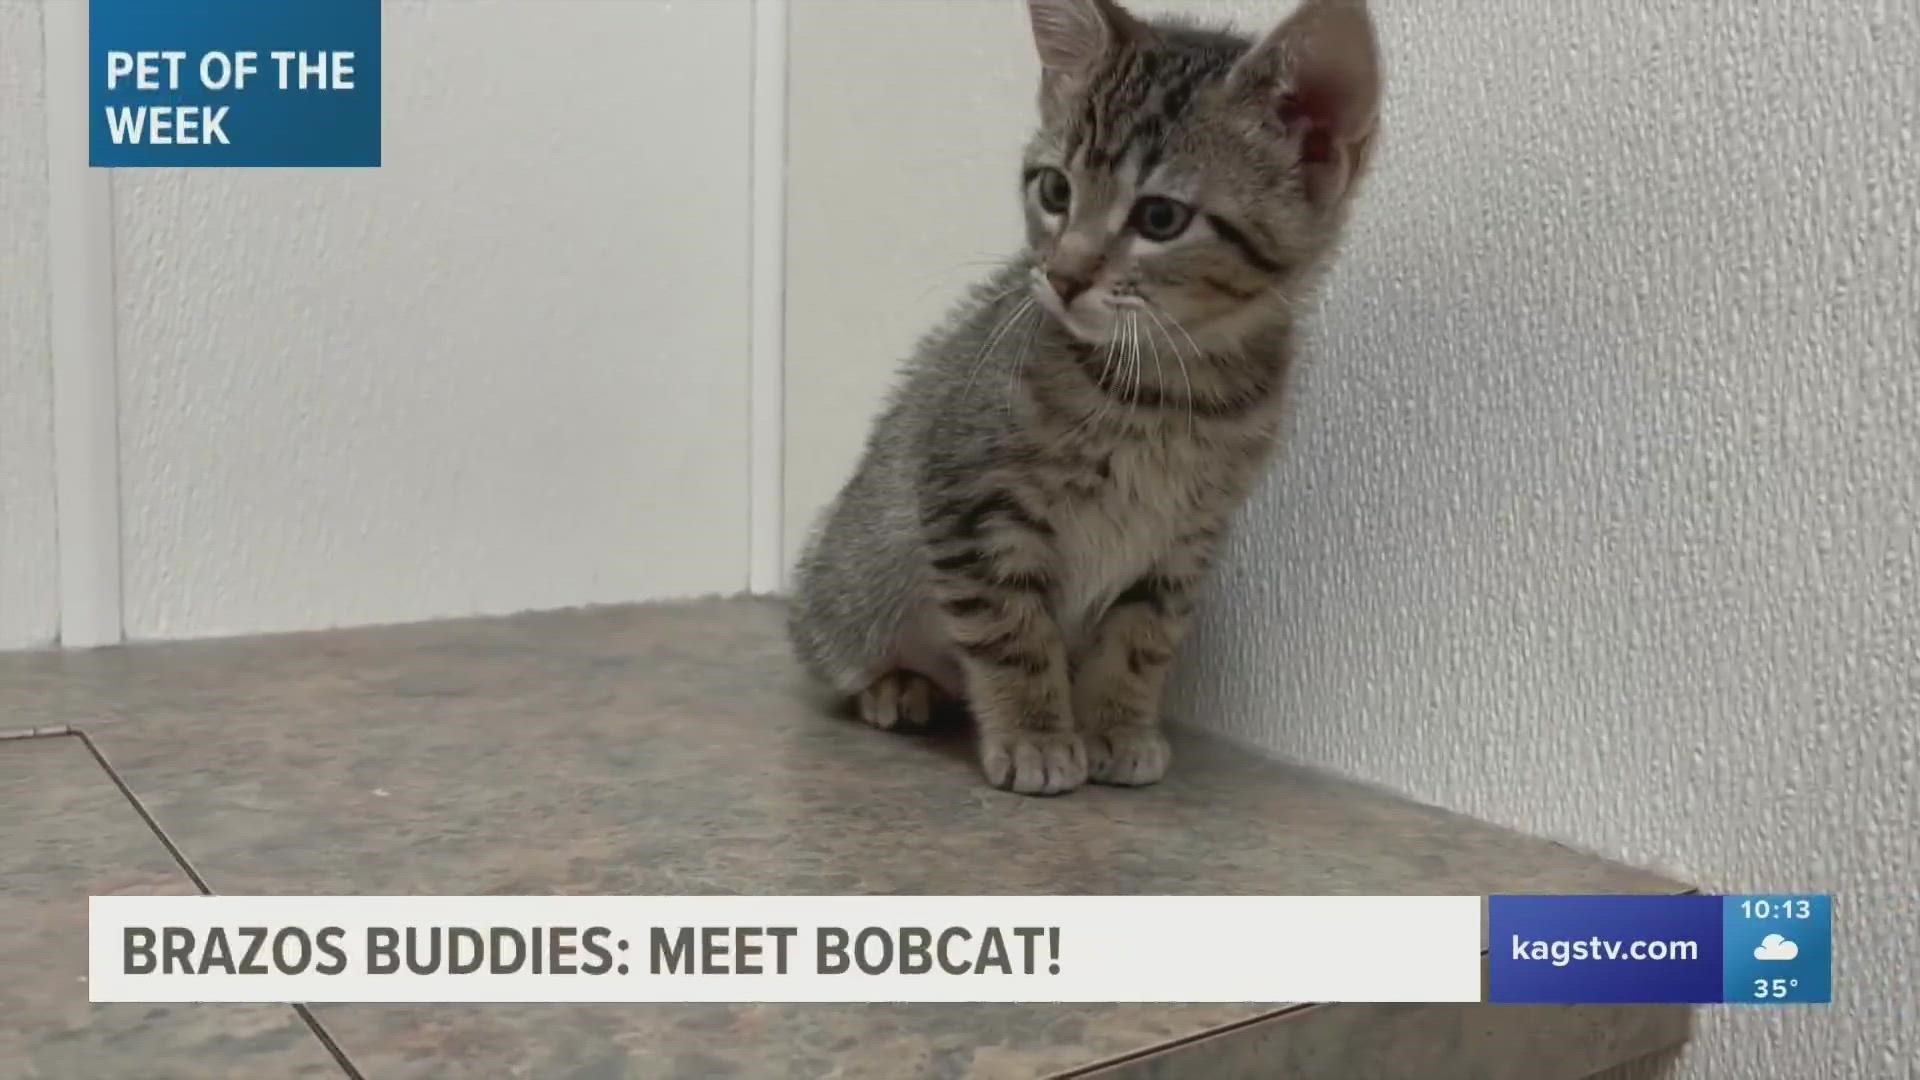 This week's featured Brazos Buddy is Bobcat, a two-month-old domestic short hair mix cat that's looking to be adopted.